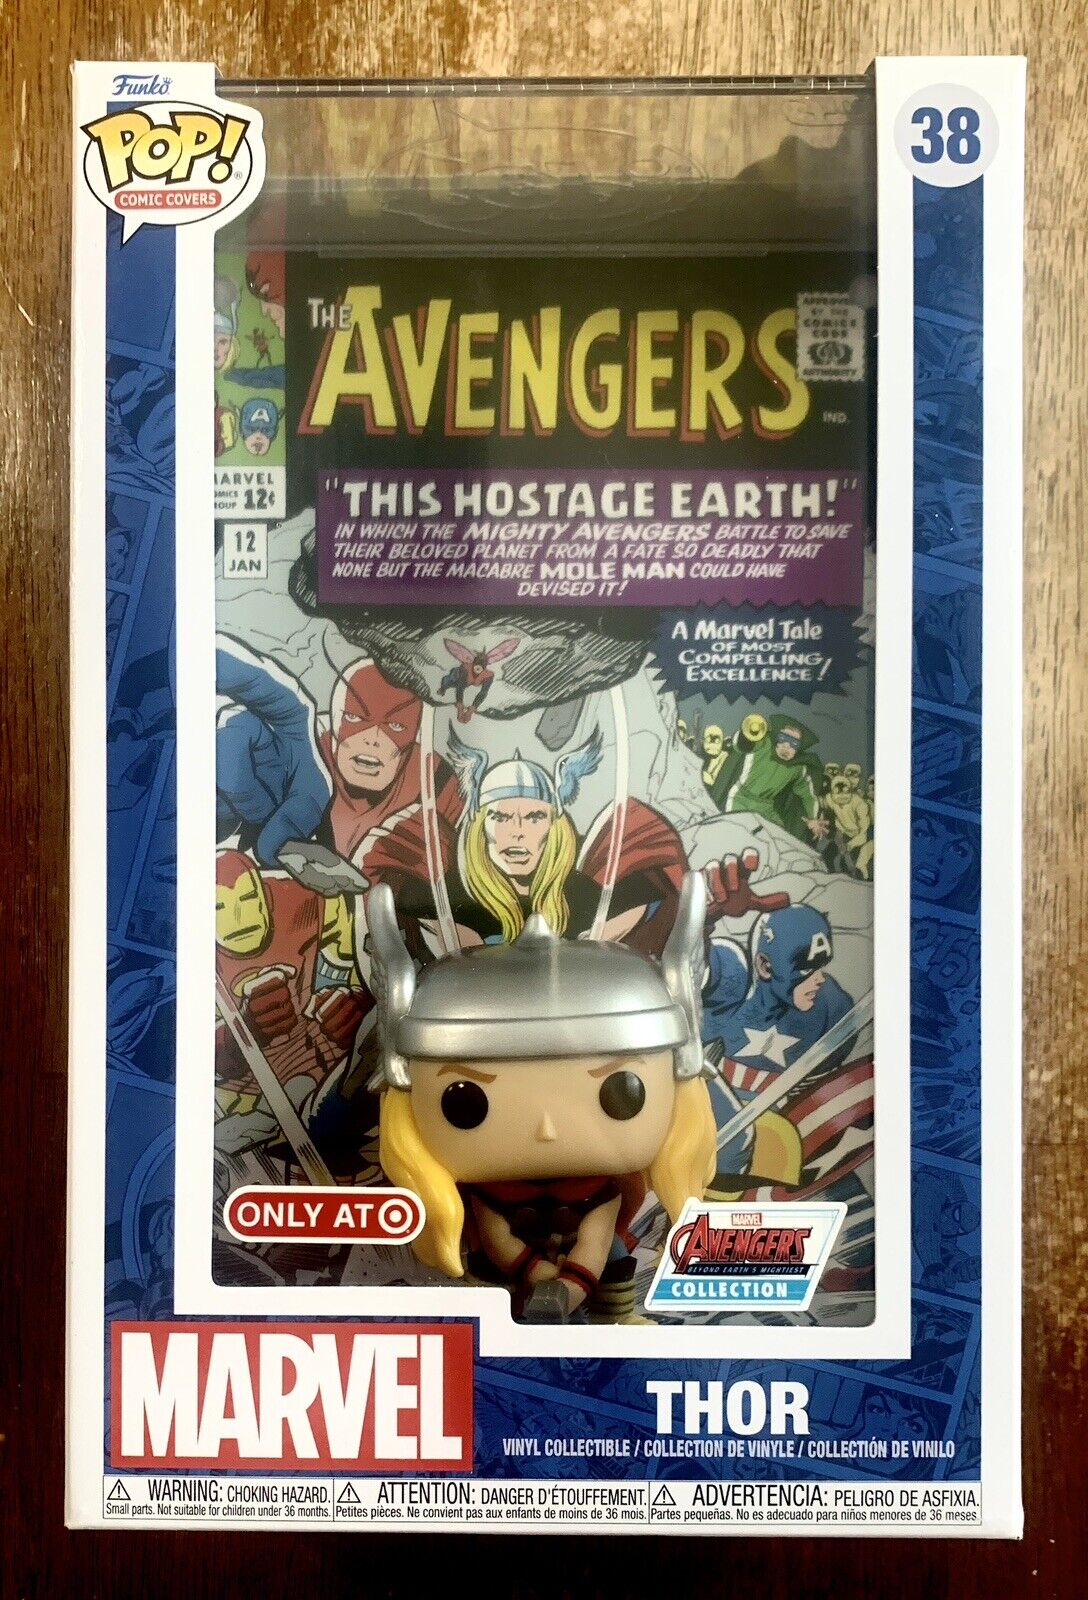 Funko Pop Comic Book Cover with Case: Marvel Thor Target Only #38 Avengers NEW